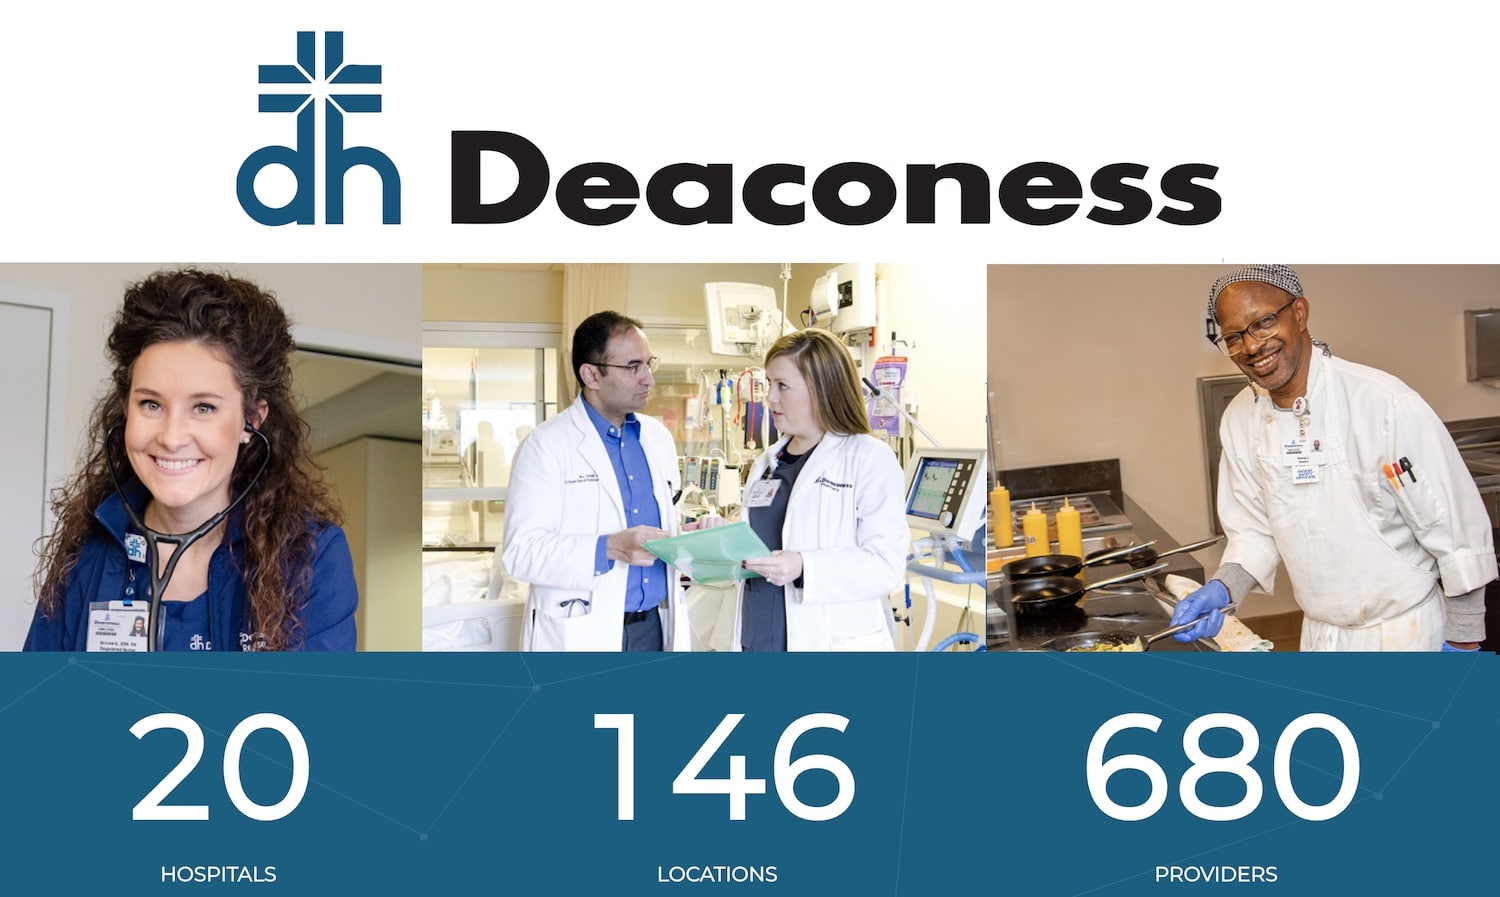 Deaconess Health System chooses HubEngage for their employee communication platform